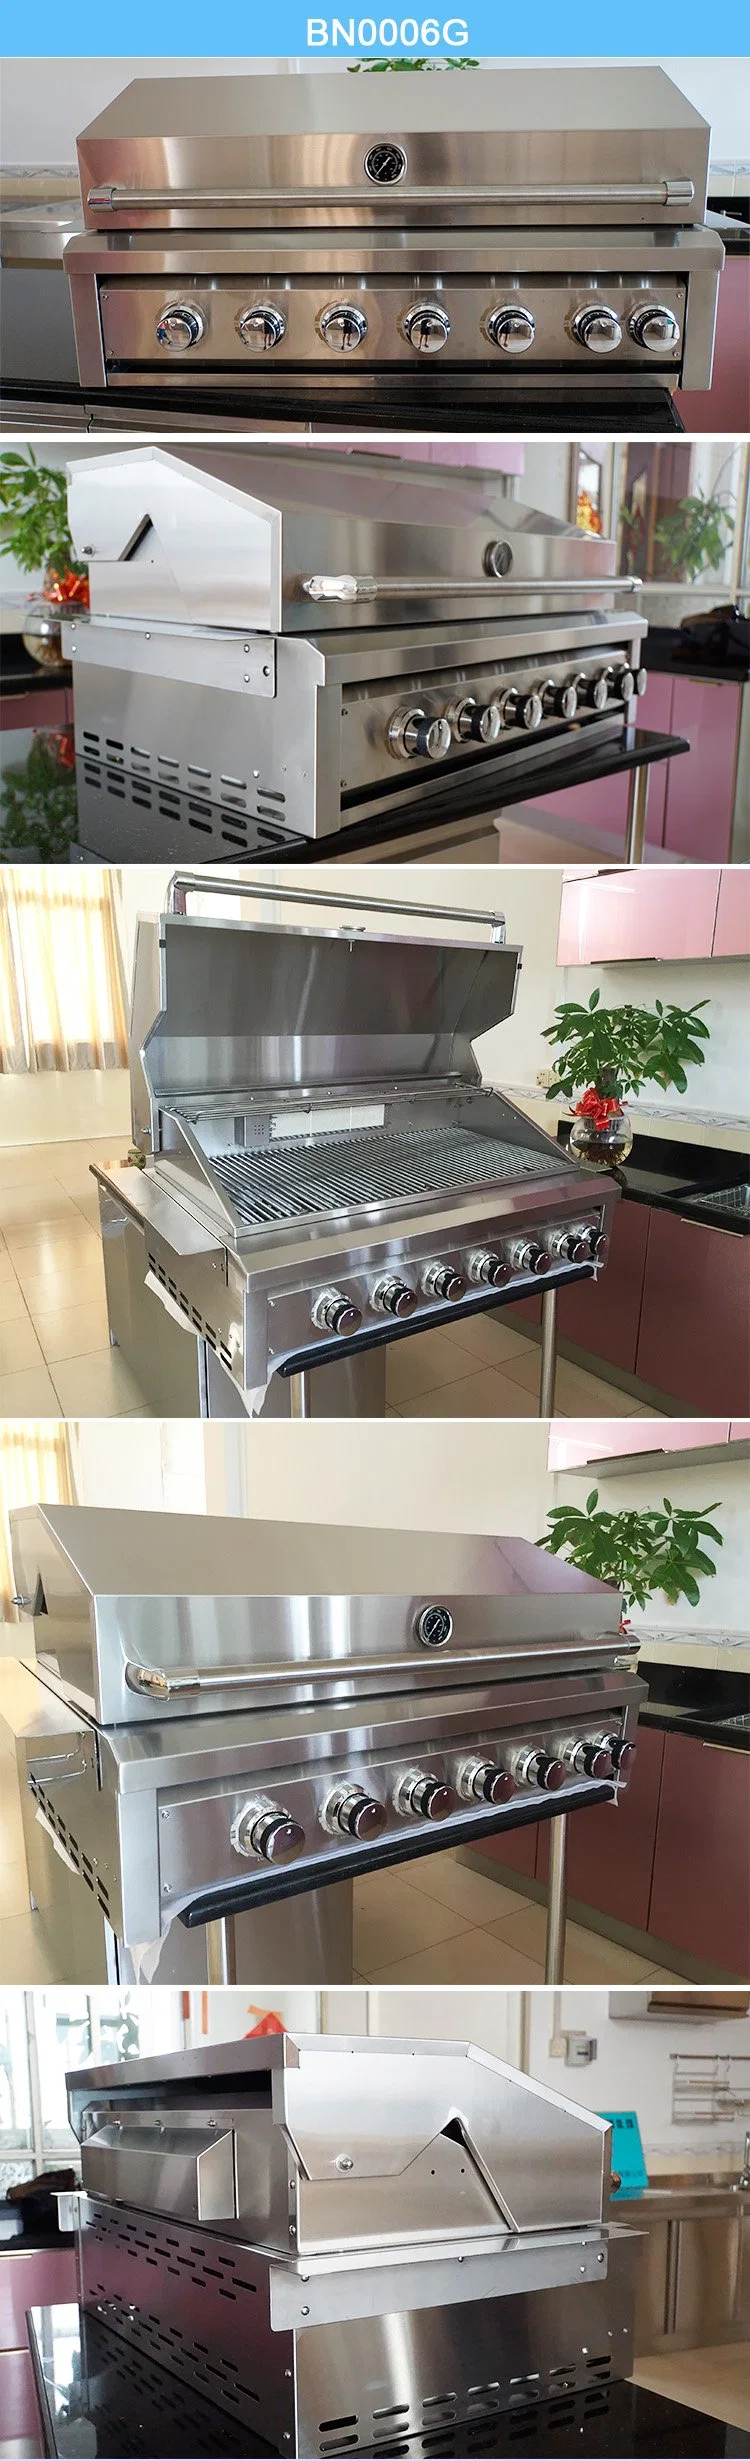 Wholesale Price Cheap Stainless Steel Built in Gas Oven BBQ Grill for Outdoor Kitchen